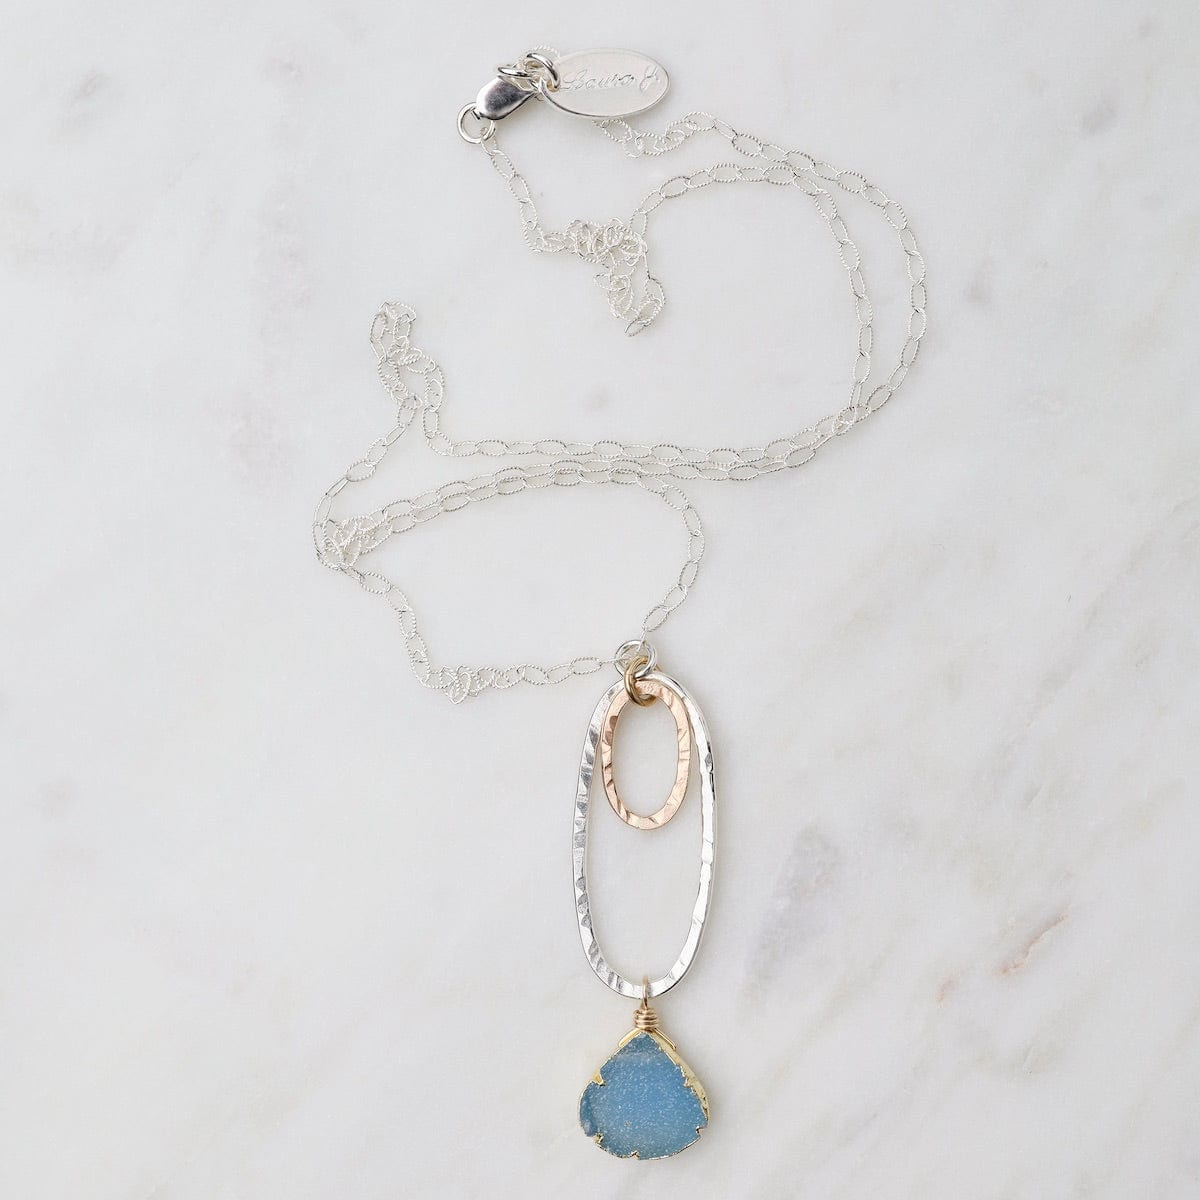 NKL-GF Double Oval with Blue Druzy Pendant Necklace